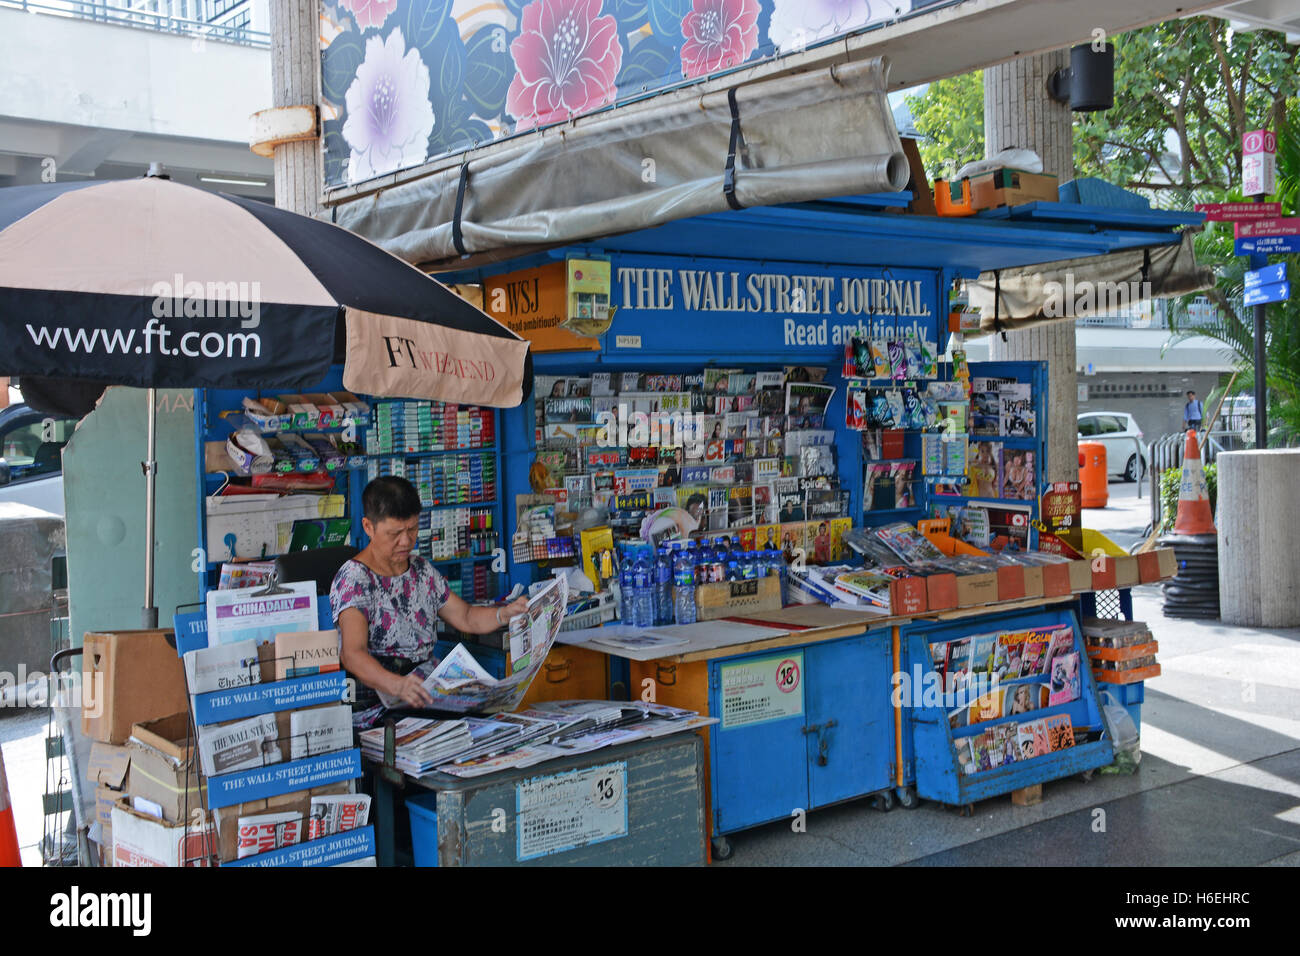 newspaper stall stand in downtown Central district, Hong Kong island China Stock Photo